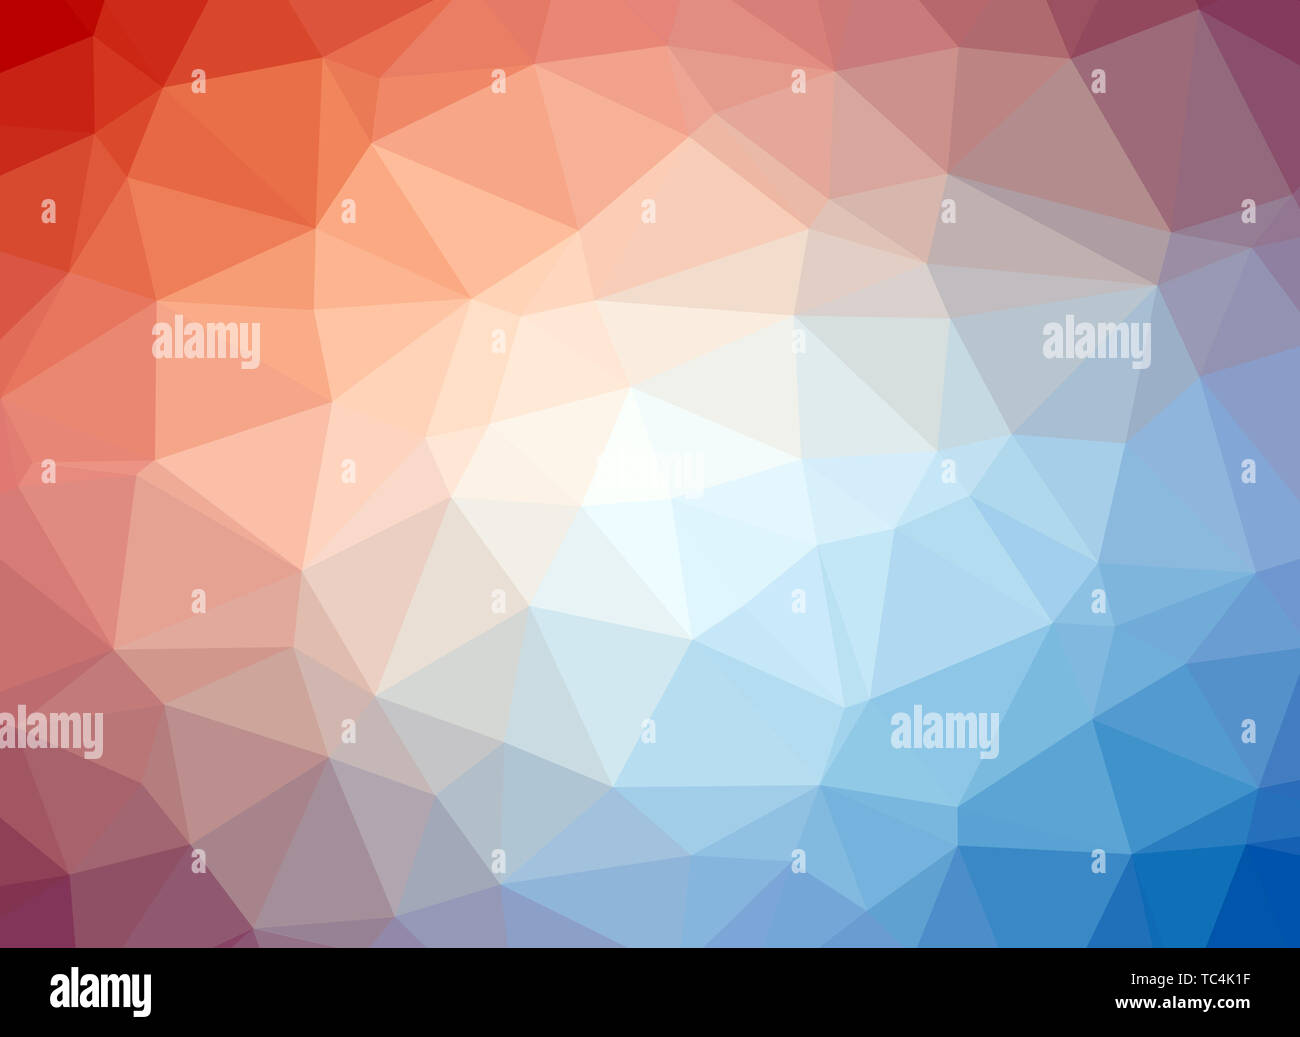 Color creative abstract wallpaper Stock Photo - Alamy